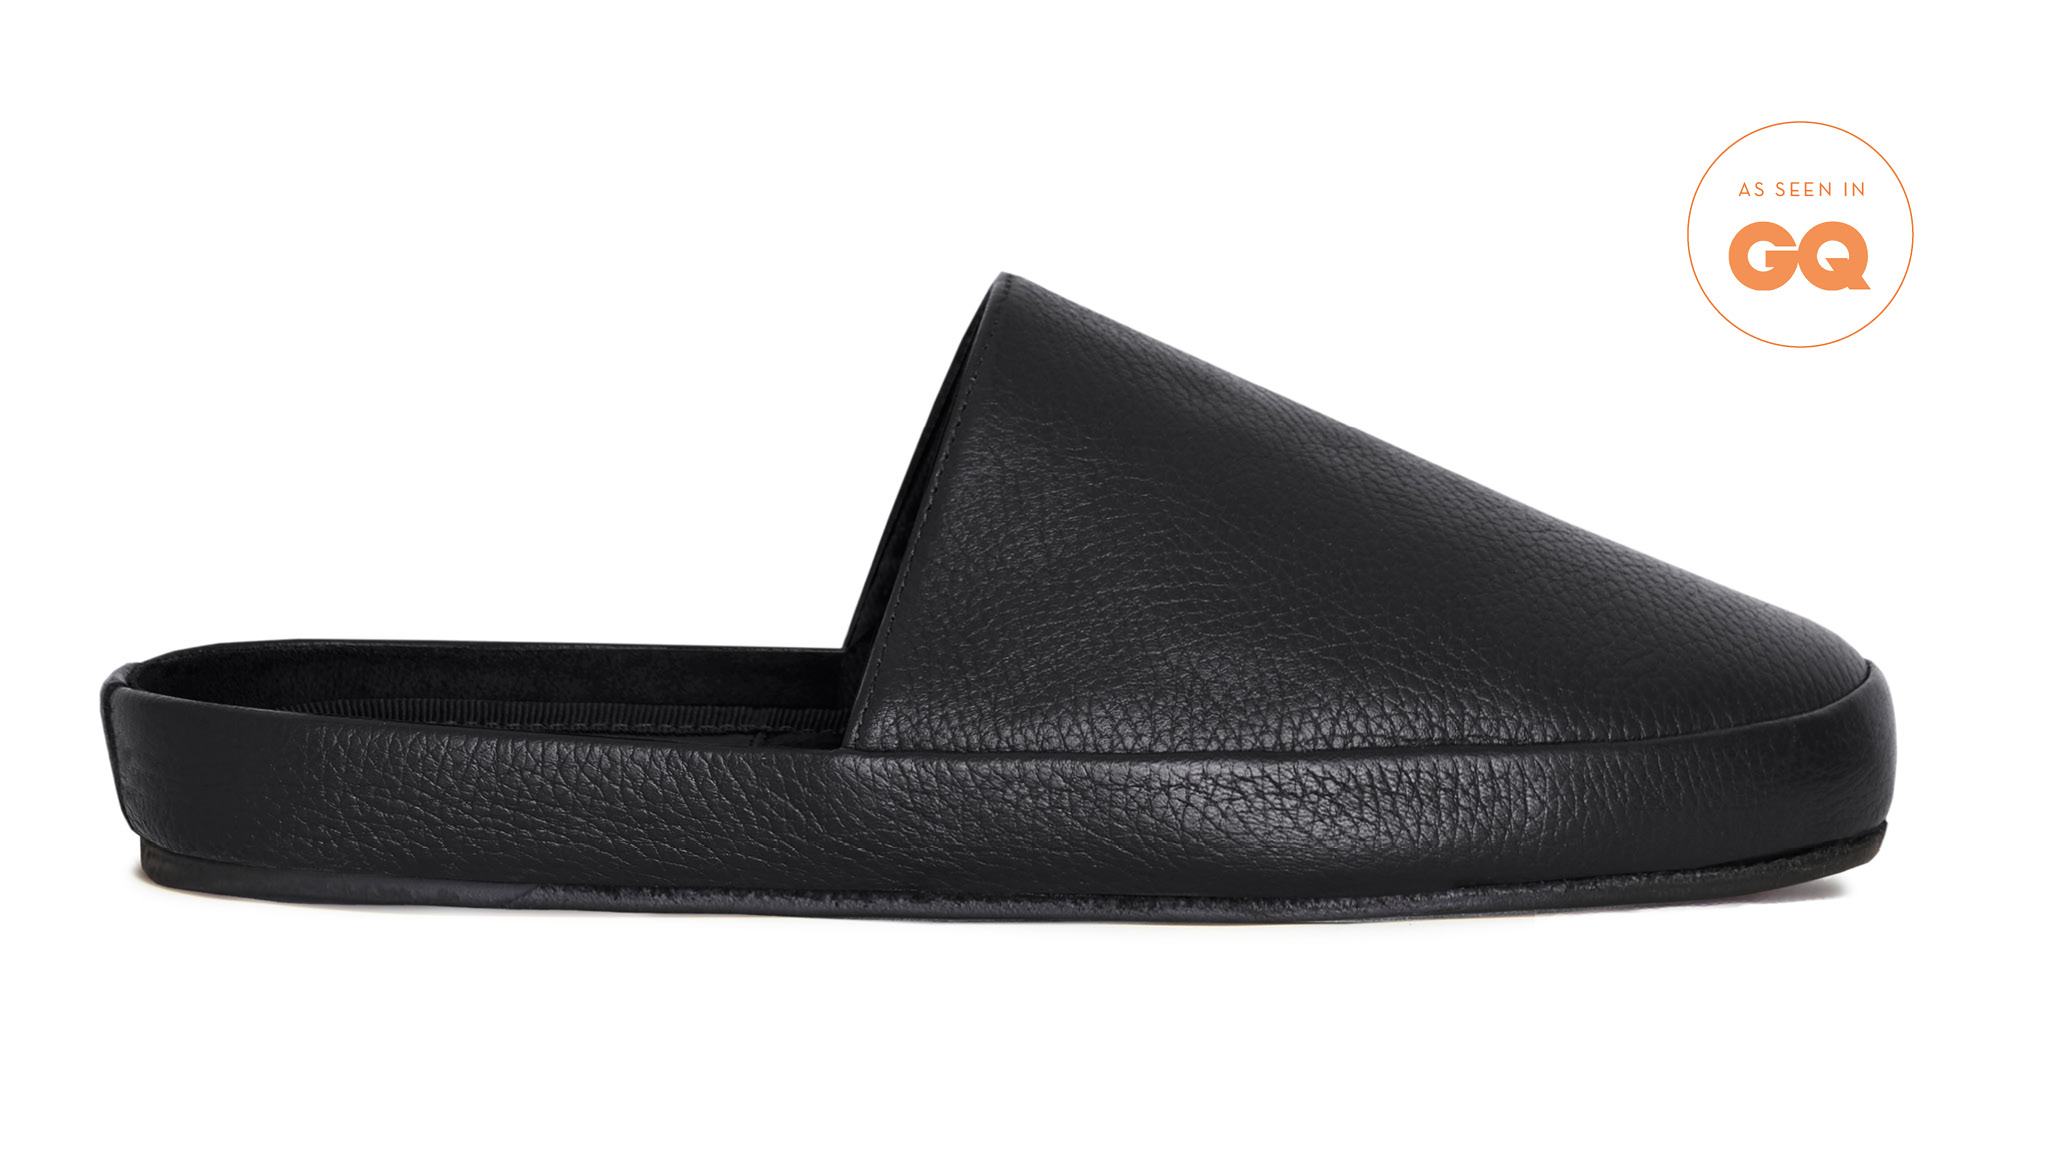 Forudsige Strømcelle software Black Leather Mens Slippers | MULO shoes | Premium Italian Leather